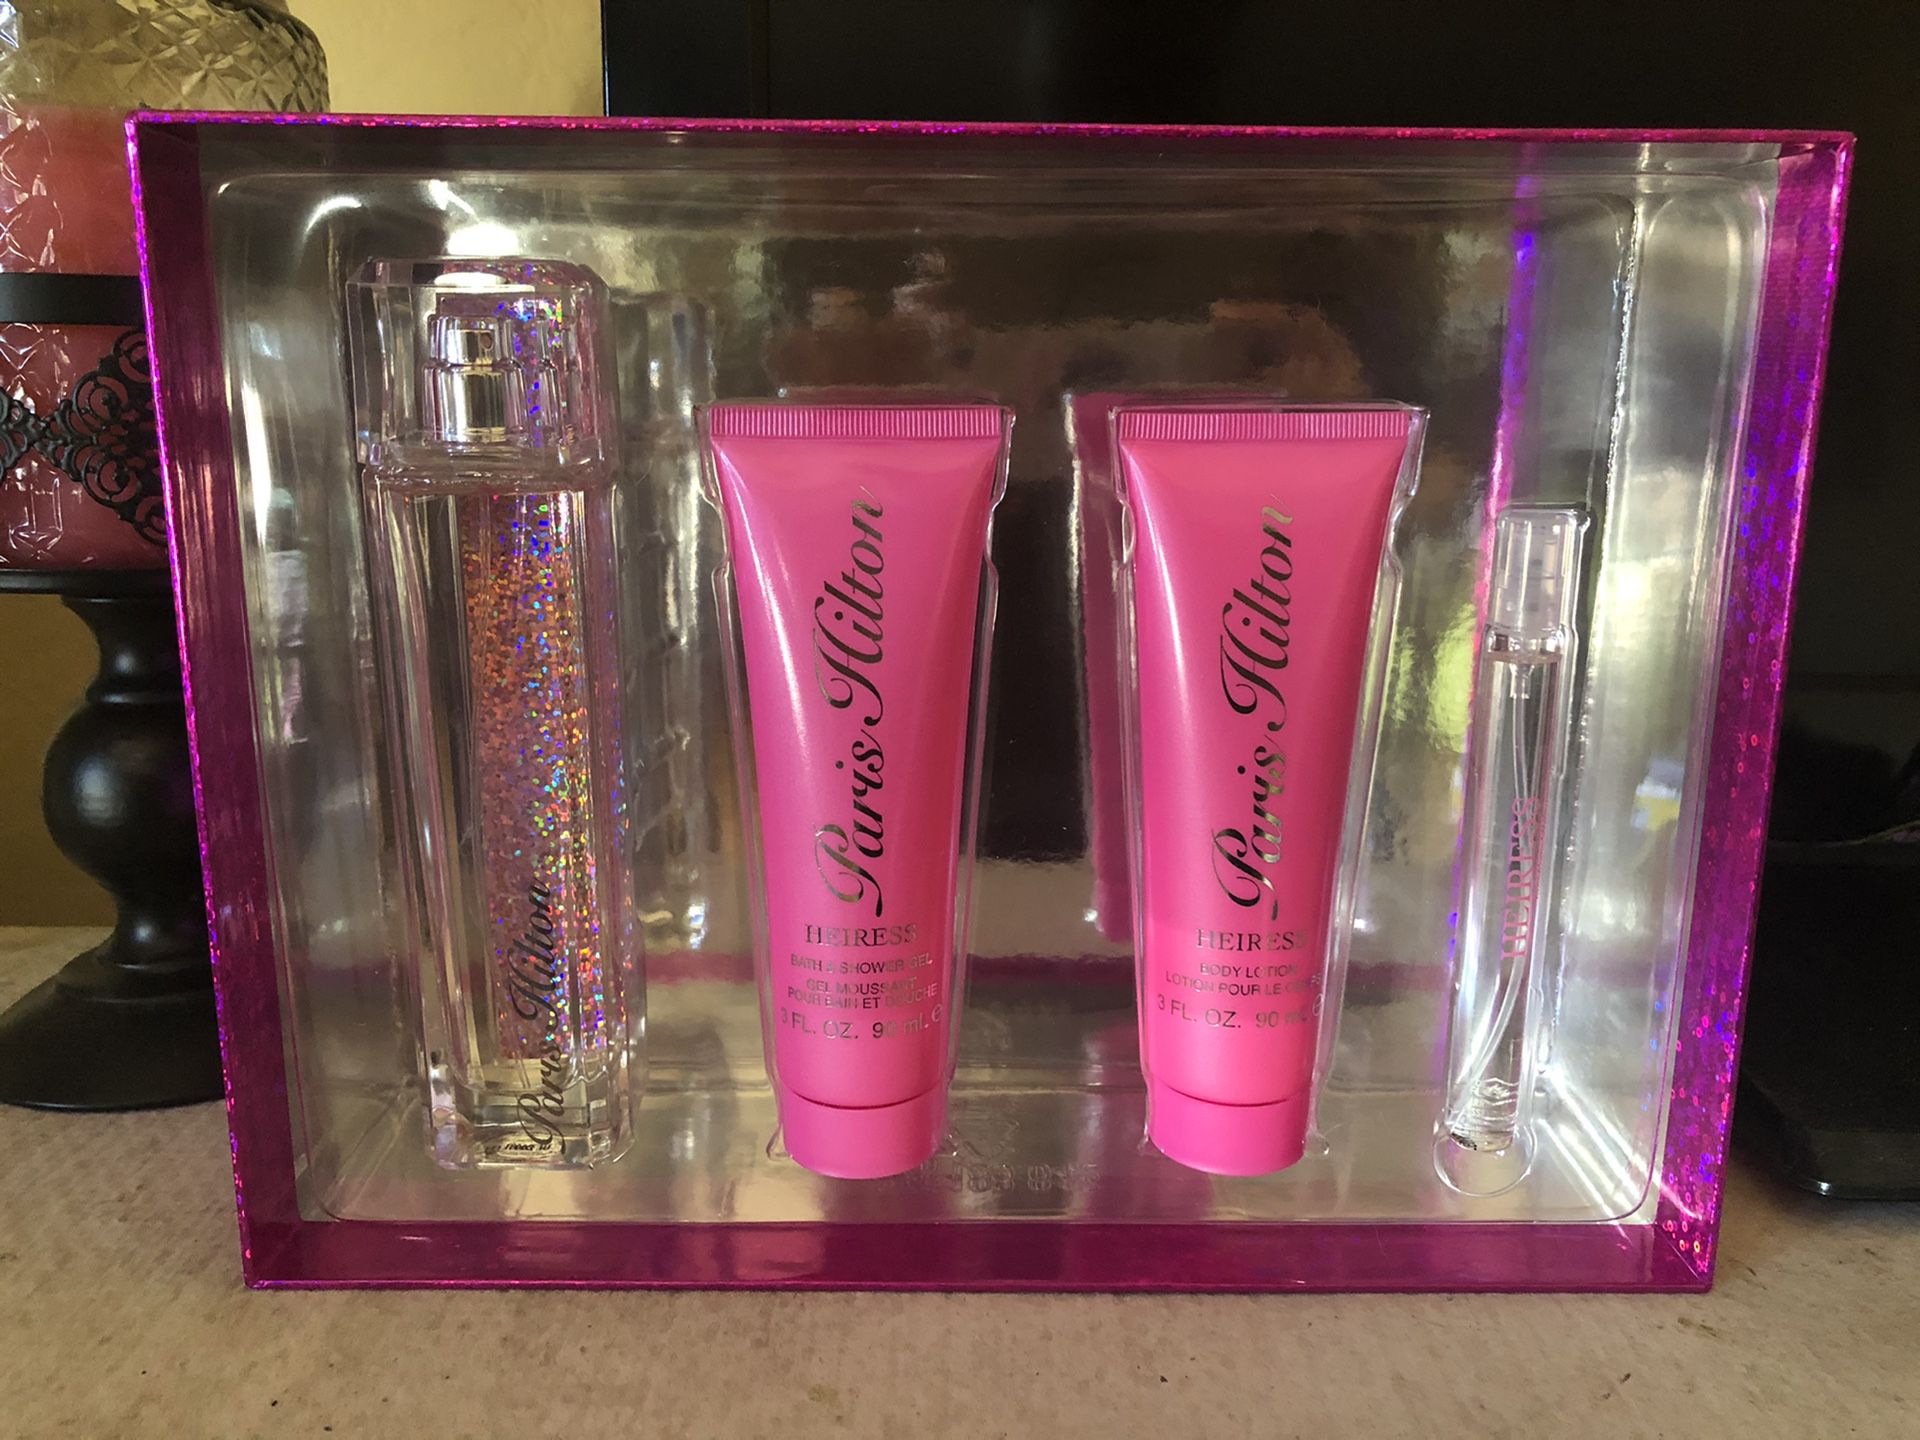 Paris Hilton Heiress Gift Set with 3.4 oz perfume, lotion, shower gel, and more